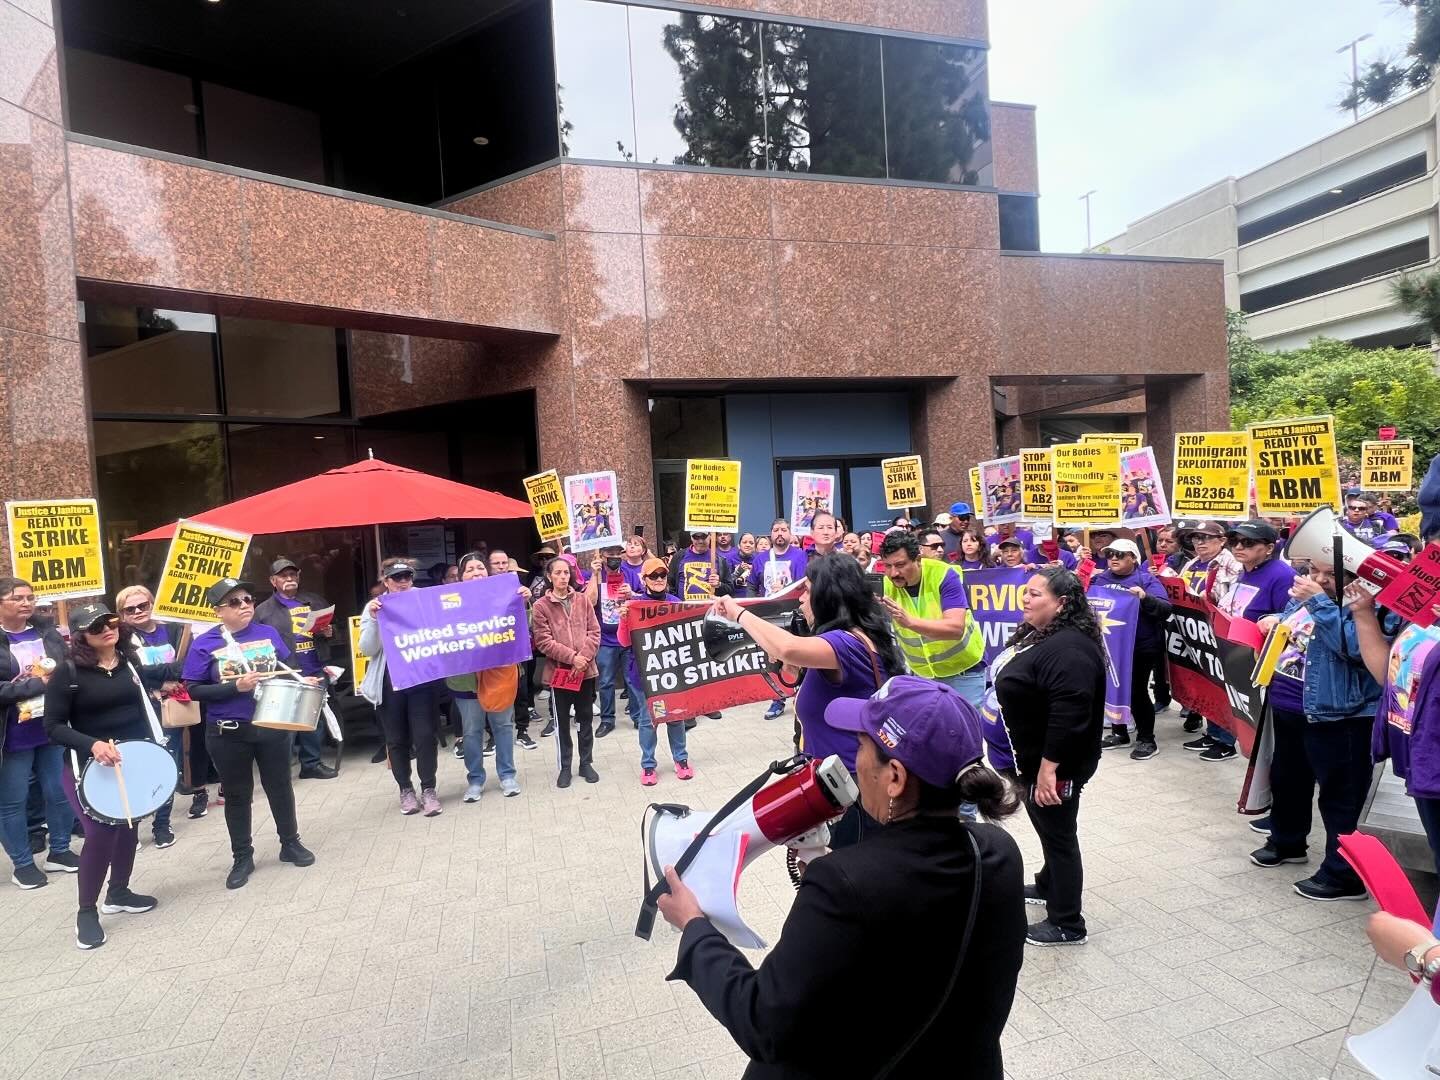 20,000 janitors across the state are bargaining for a new contract, 2,000 janitors clean prestigious biotech and high-tech companies, as well as commercial real estate in our city and county!
 
Negotiations have come to a halt due to ABM&rsquo;s unfa